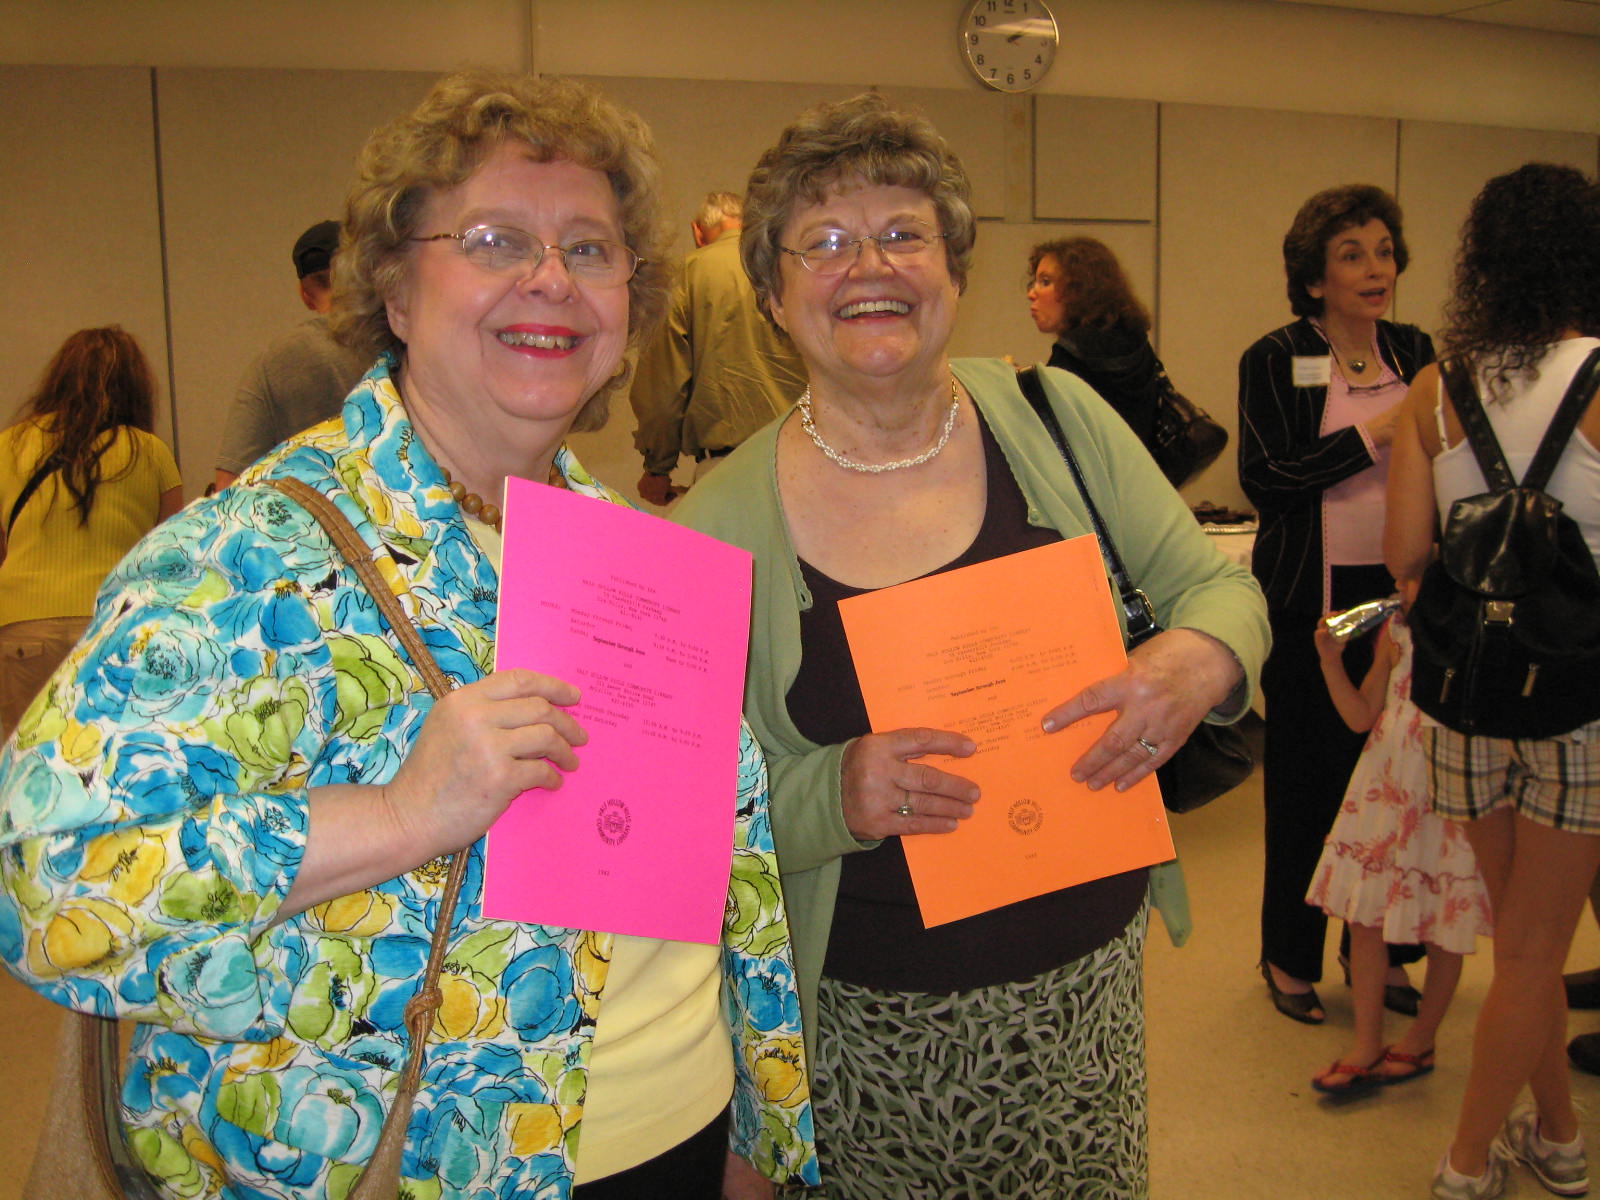 Image of Janet Griebert and friend attending the Half Hollow Hills Community Library's 50th Birthday celebration in April 2009